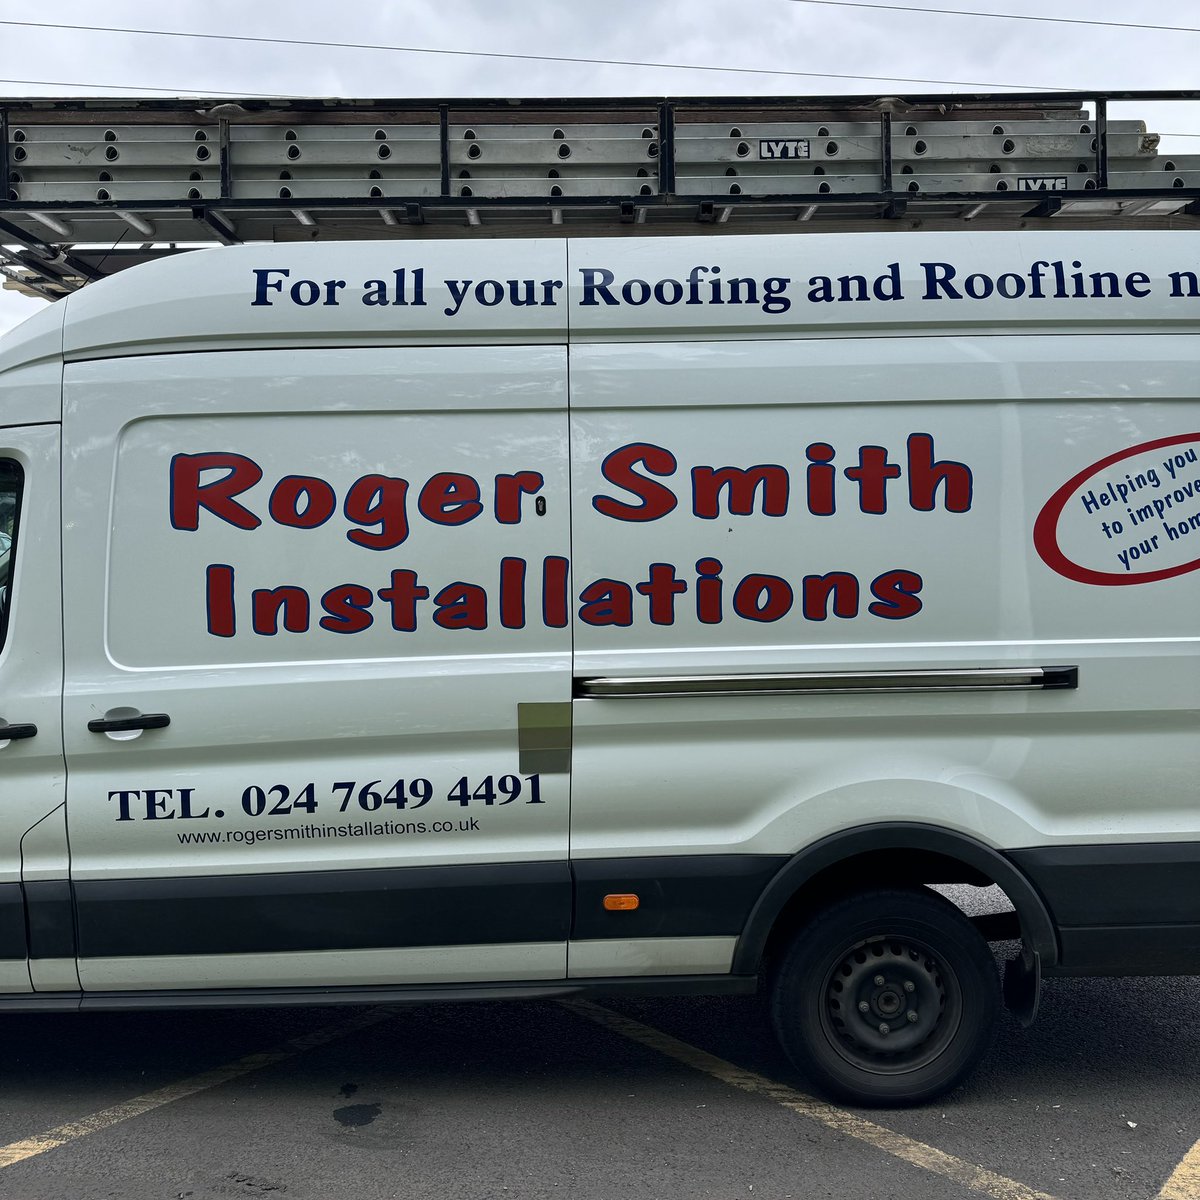 Got any Roger Smiths you need installing?